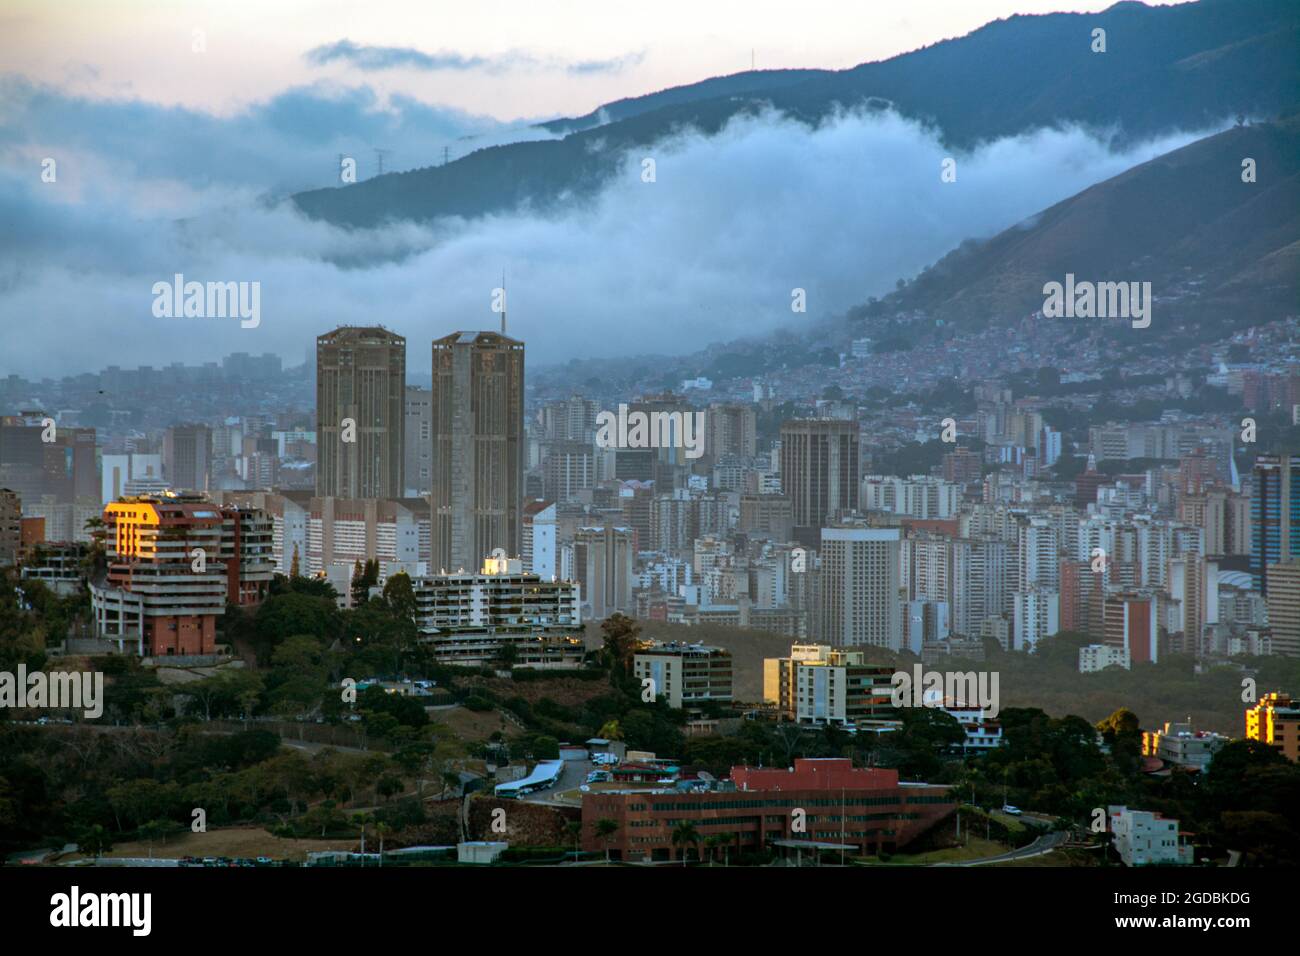 View of the city of Caracas, Venezuela and the twin towers of Central Park. Stock Photo